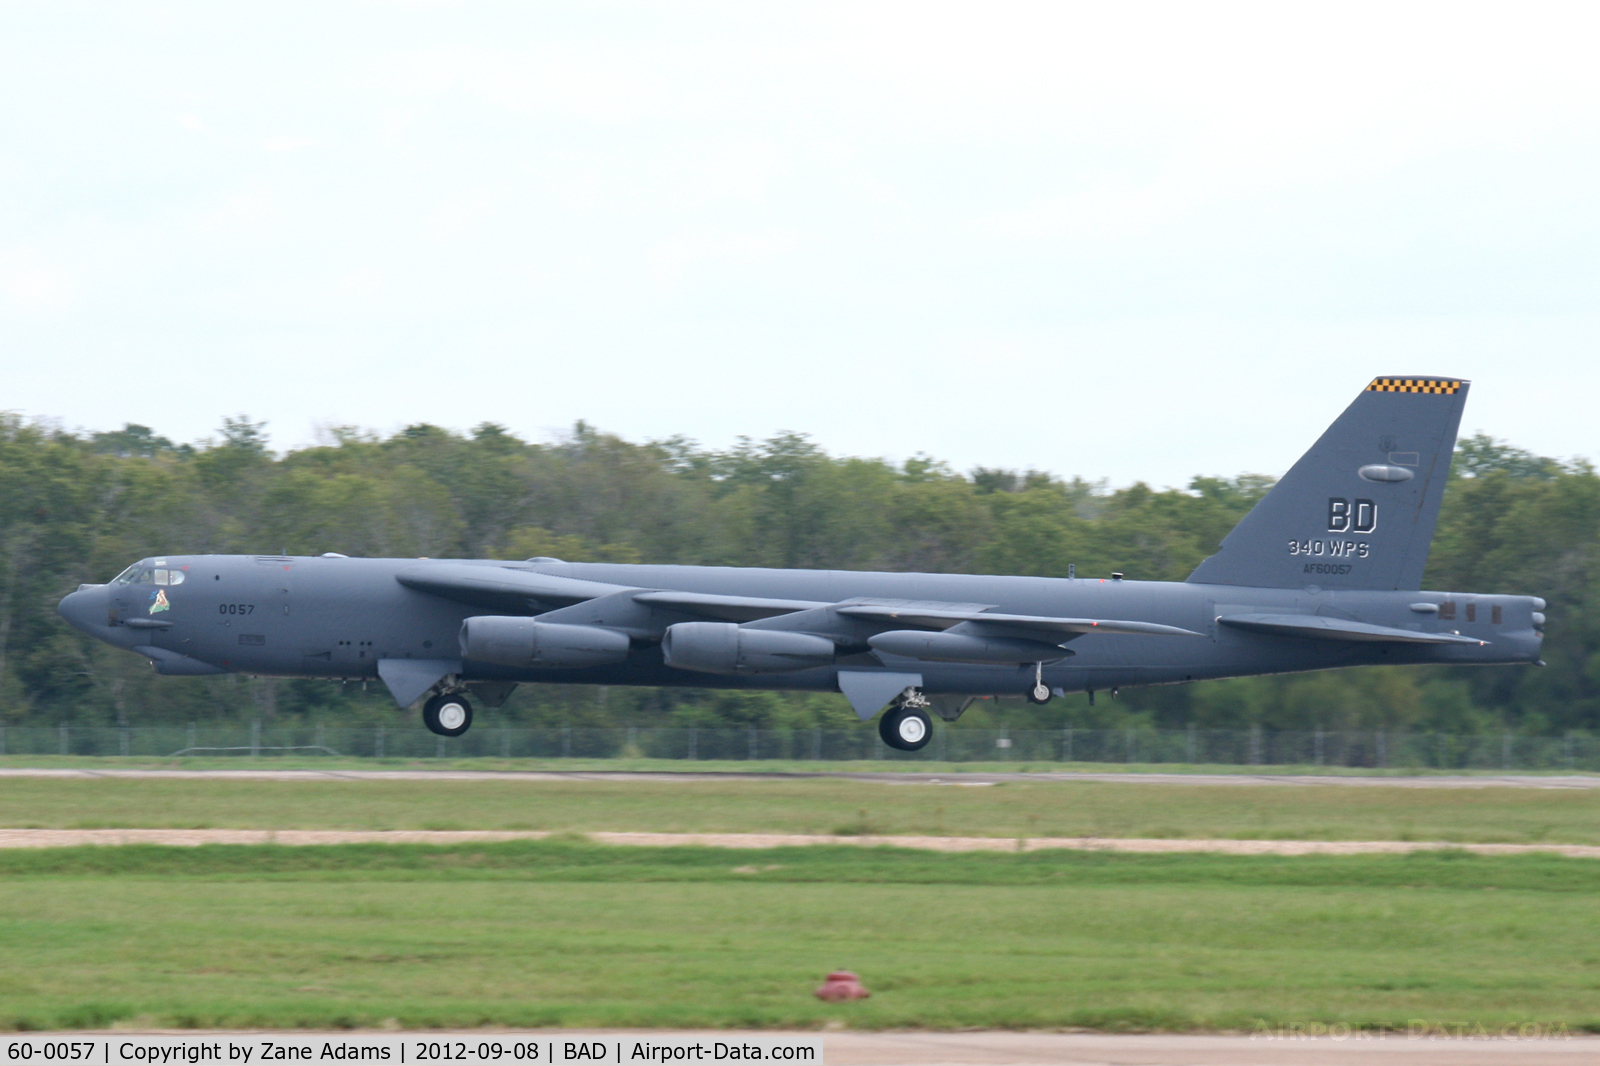 60-0057, 1960 Boeing B-52H Stratofortress C/N 464422, At Barksdale AFB